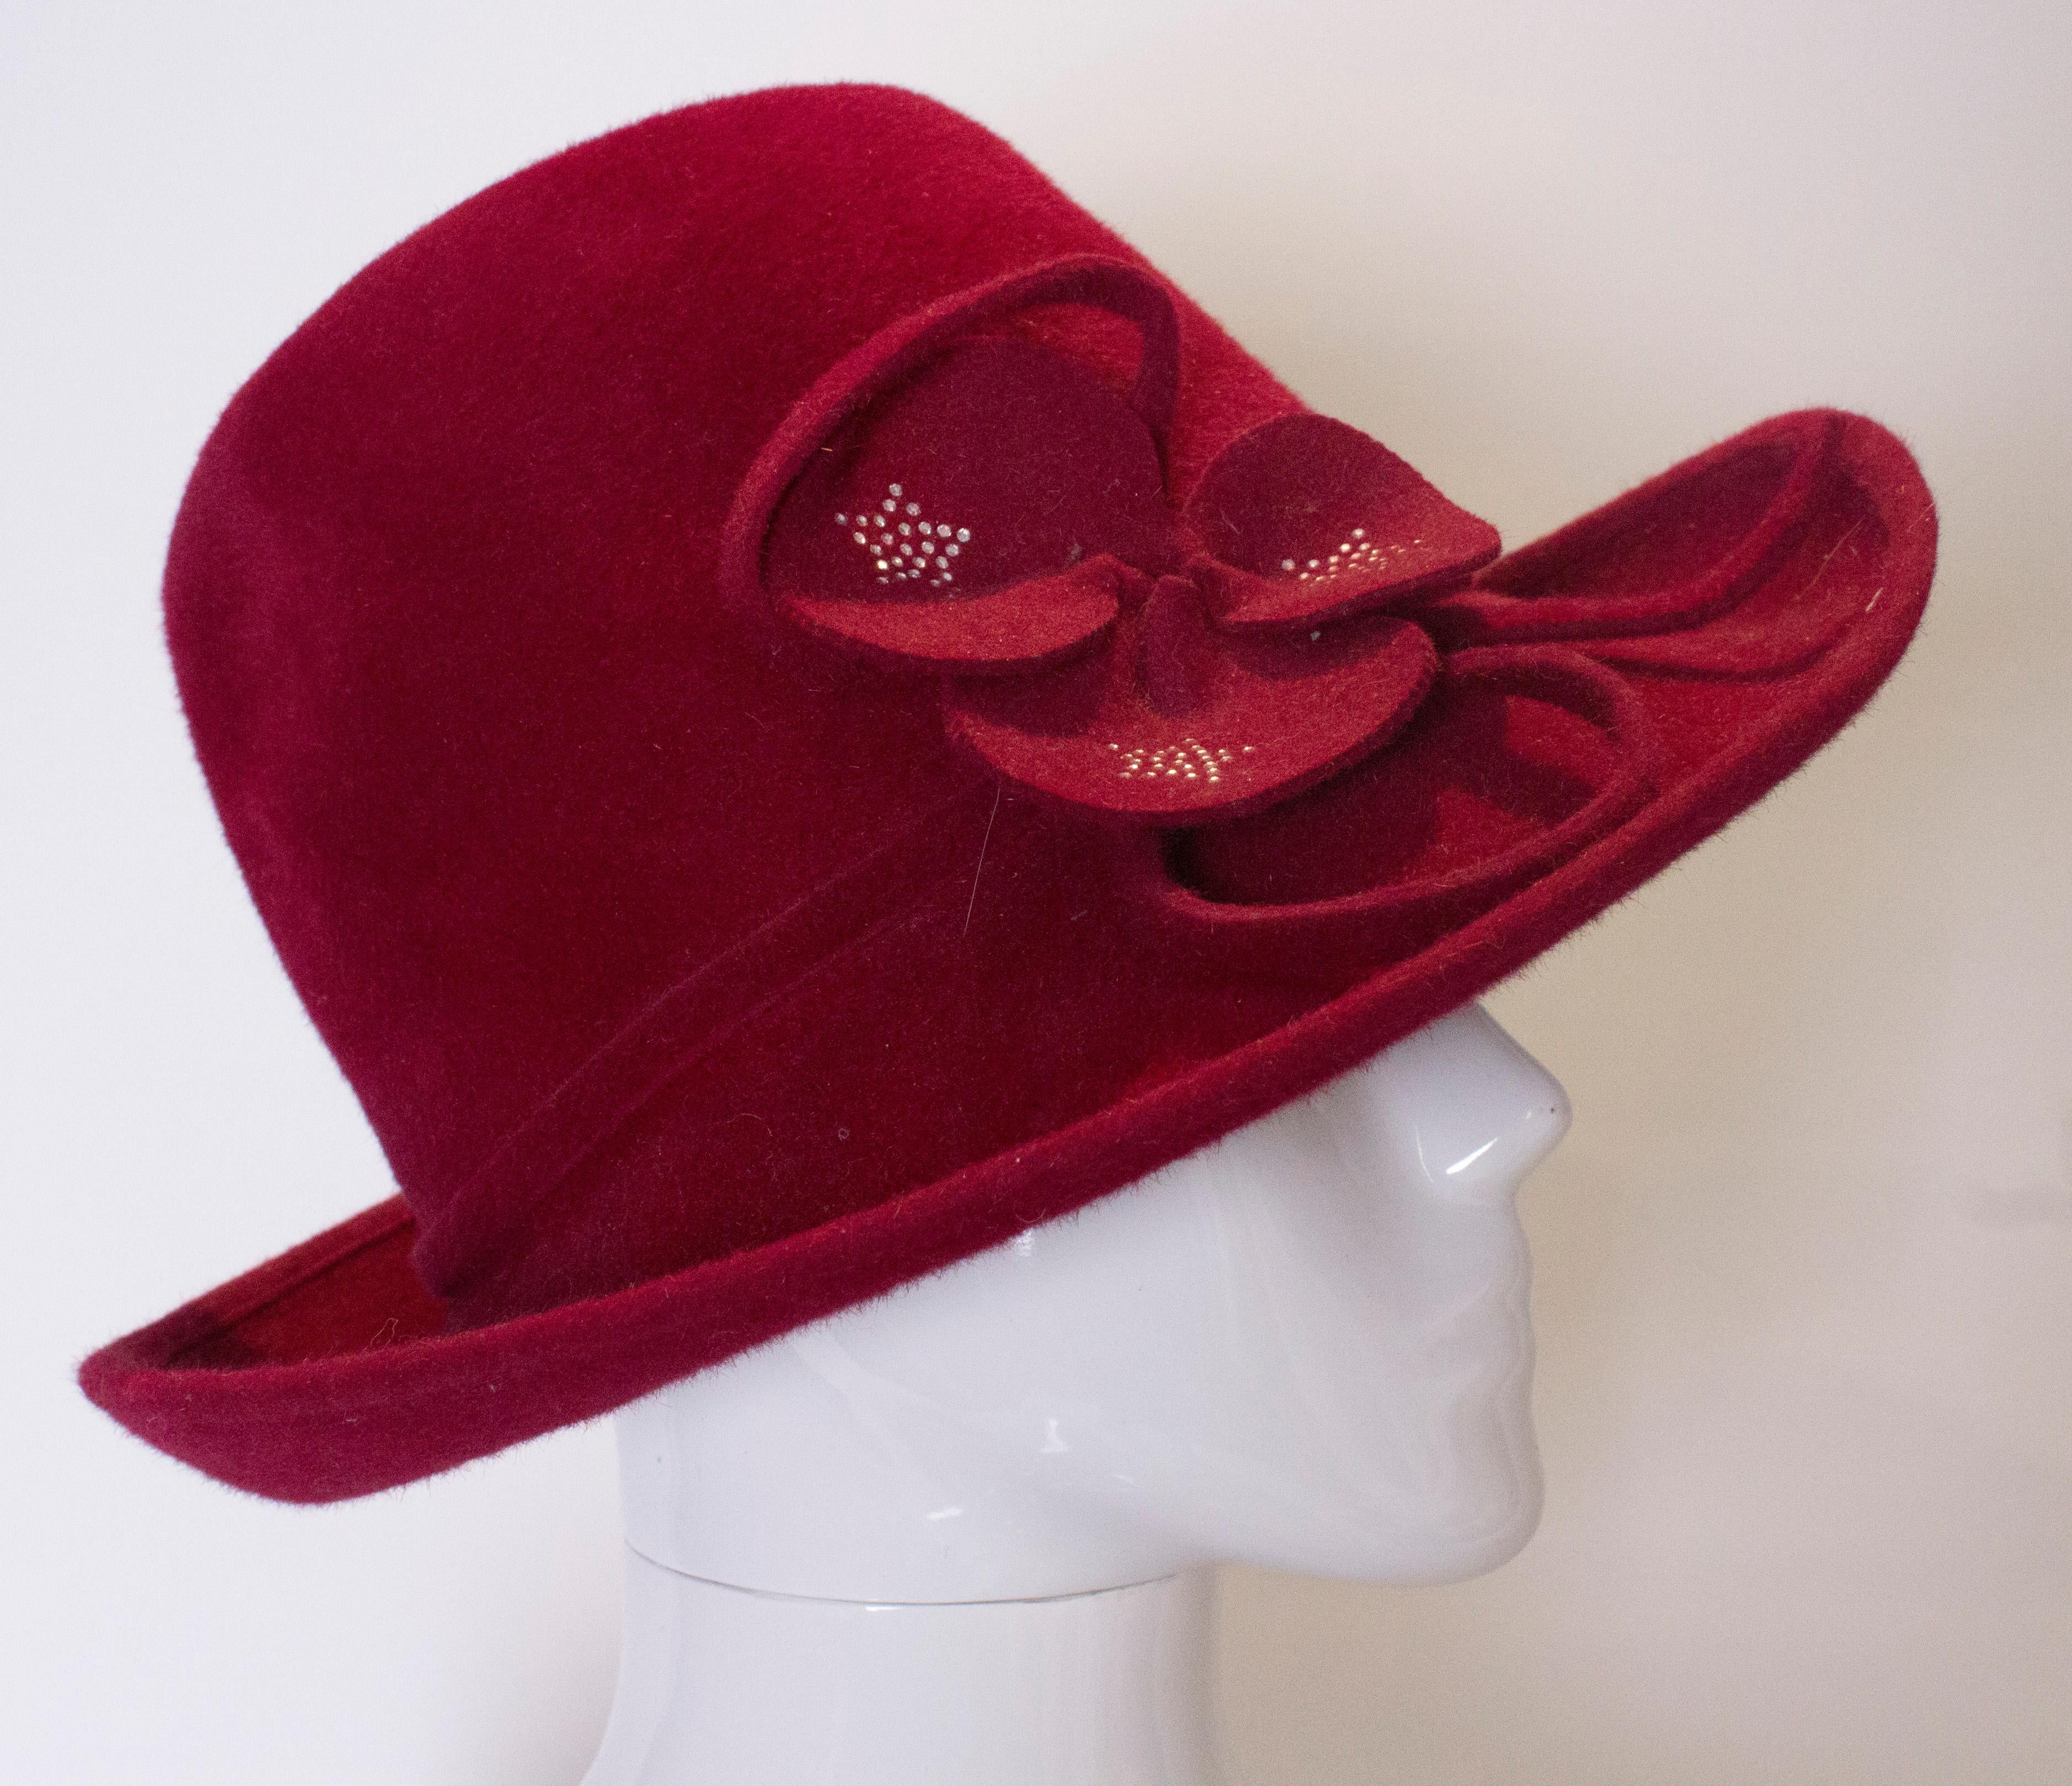 A great hat for fall/winter by Peter Bettley. In a plum colour the hat has an attractive floral detail with diamante on the petals.